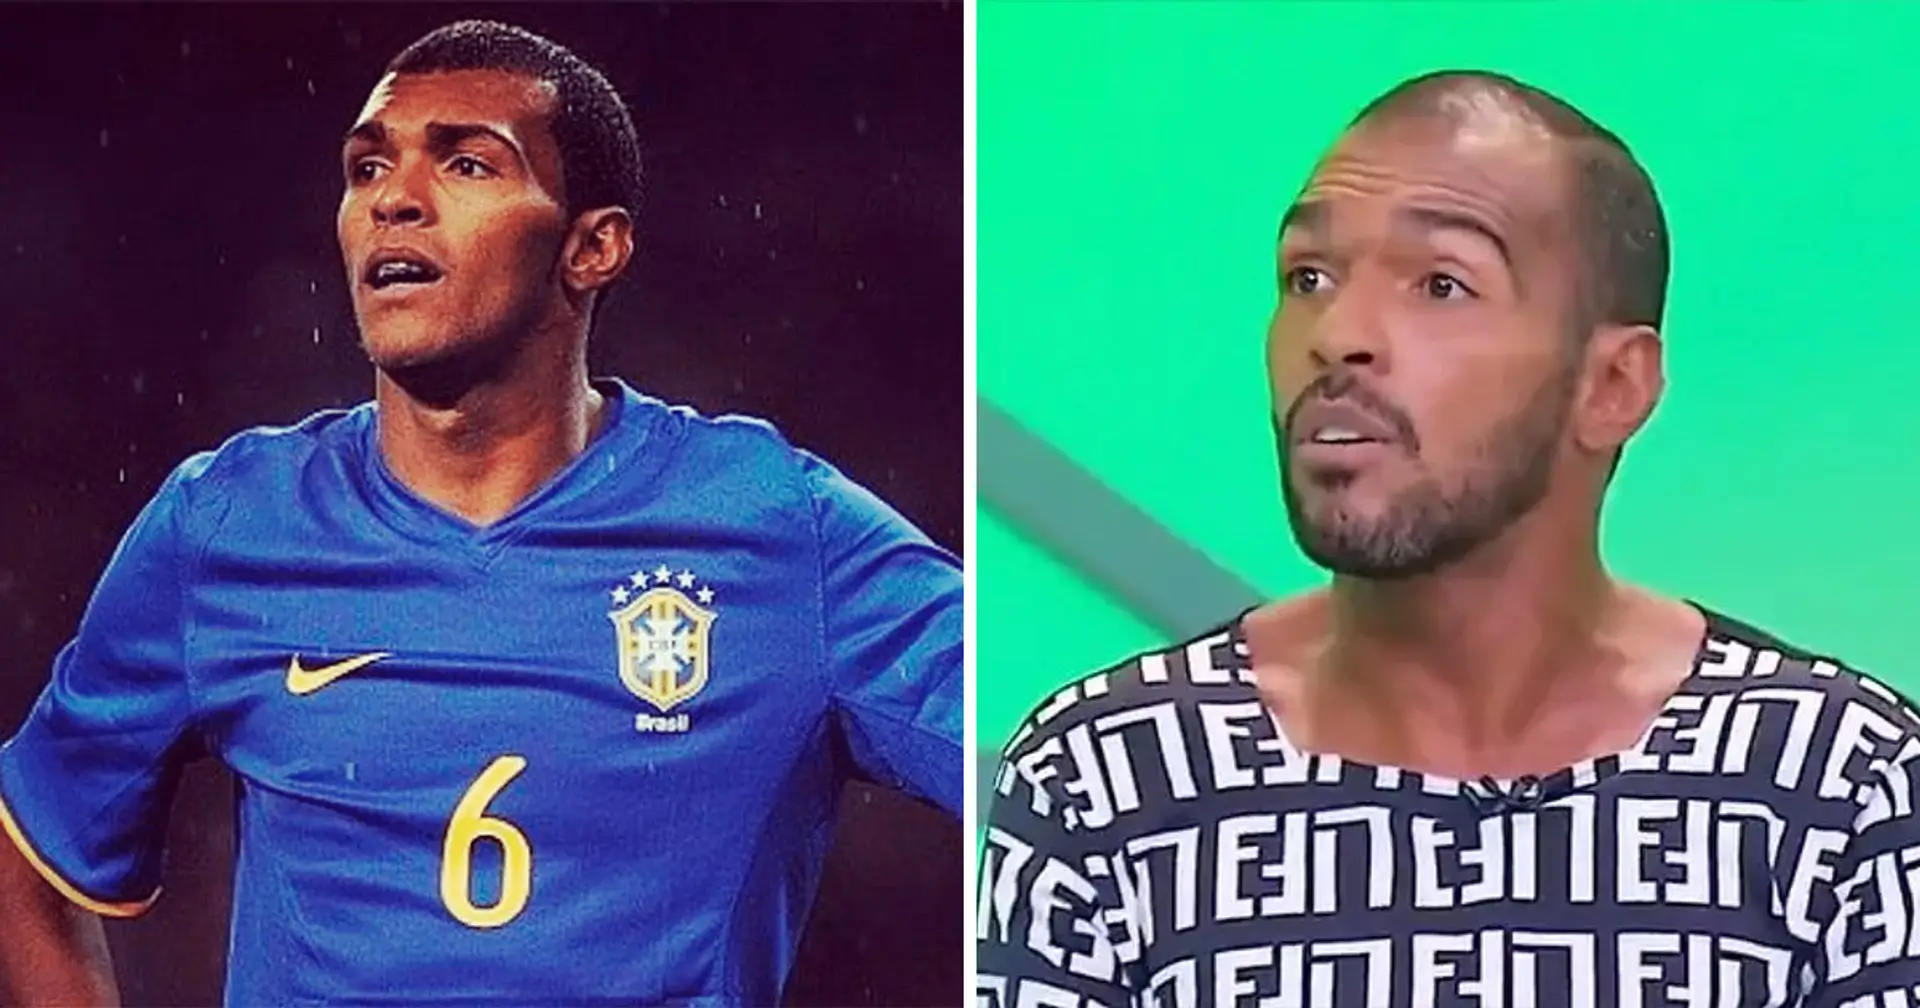 'I've had a relationship with a man as well': Former Brazil star Richarlyson comes out as bisexual  